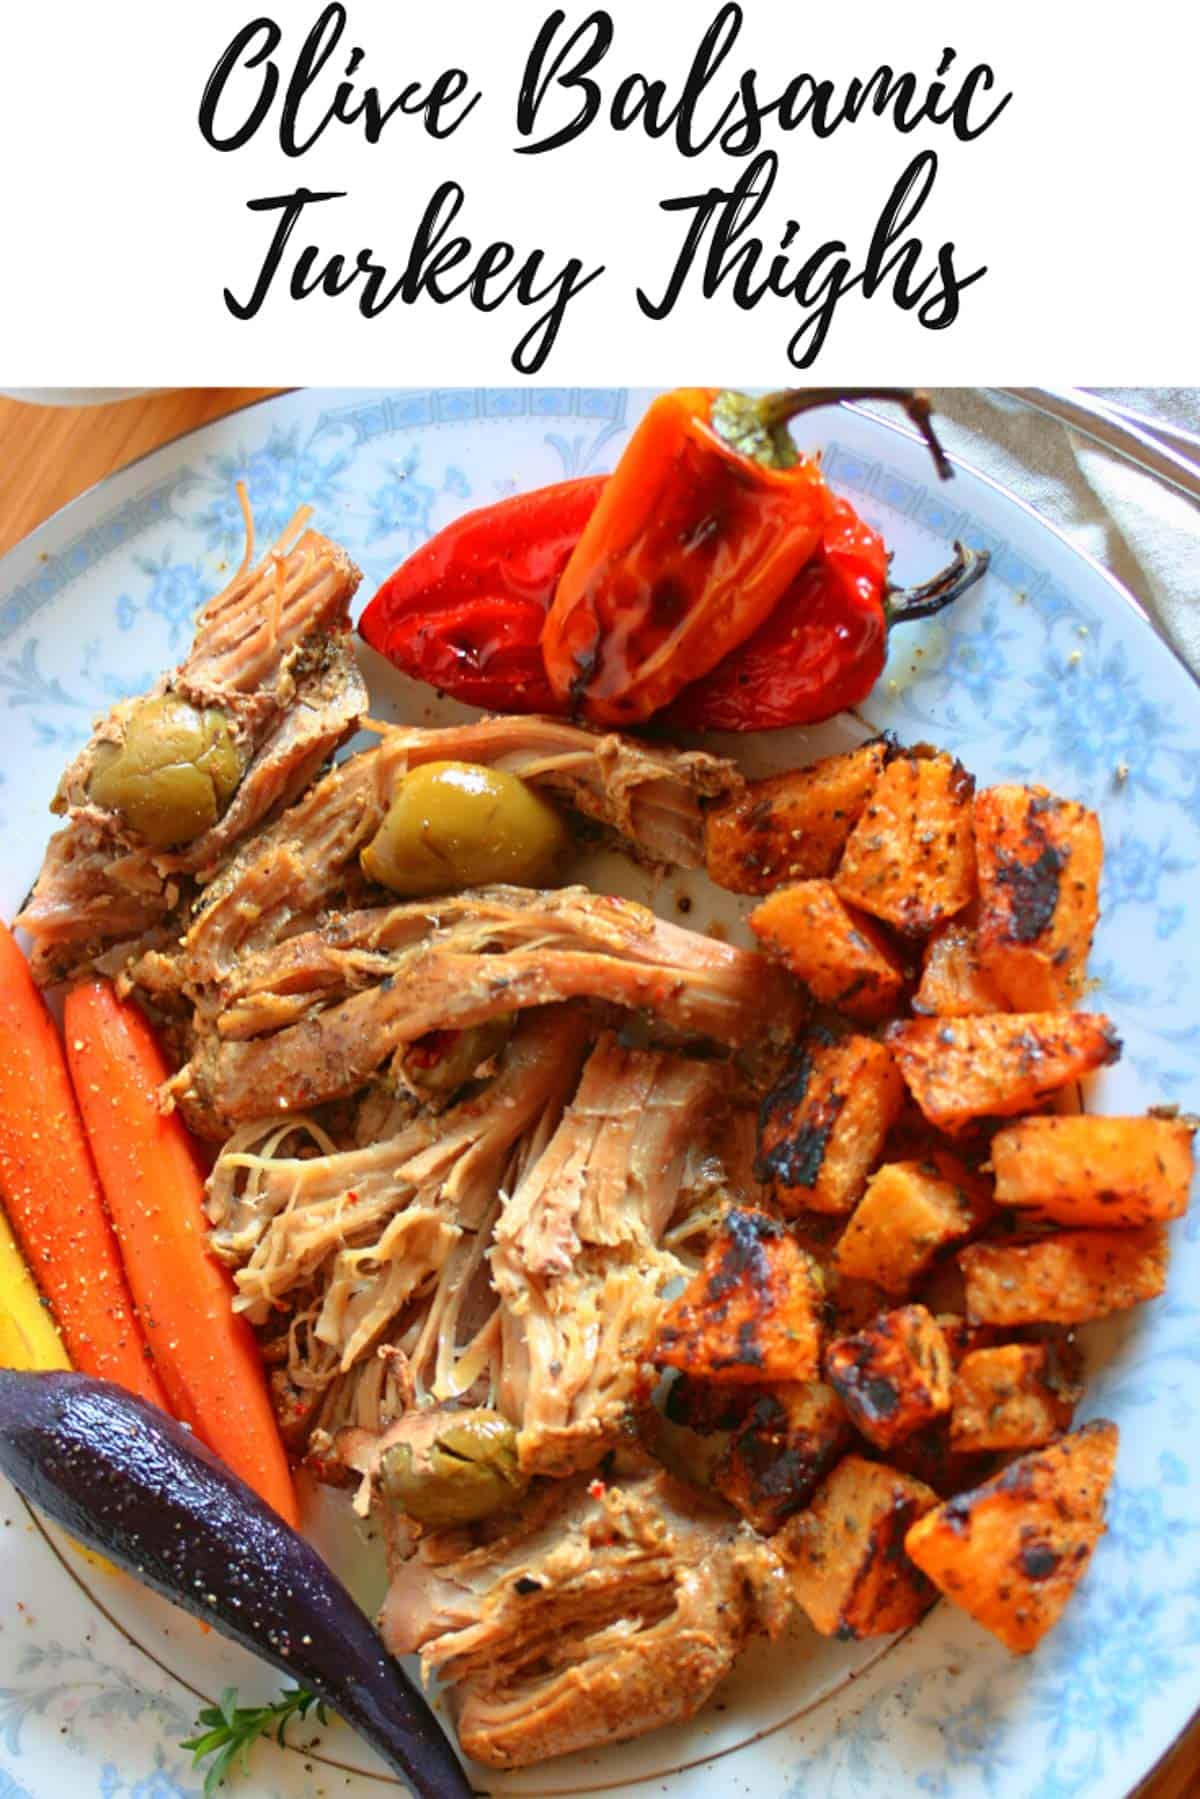 Plate of turkey thighs shredded with olives and balsamic and sides of carrots, peppers and rutabagas with a cursive label at the top.